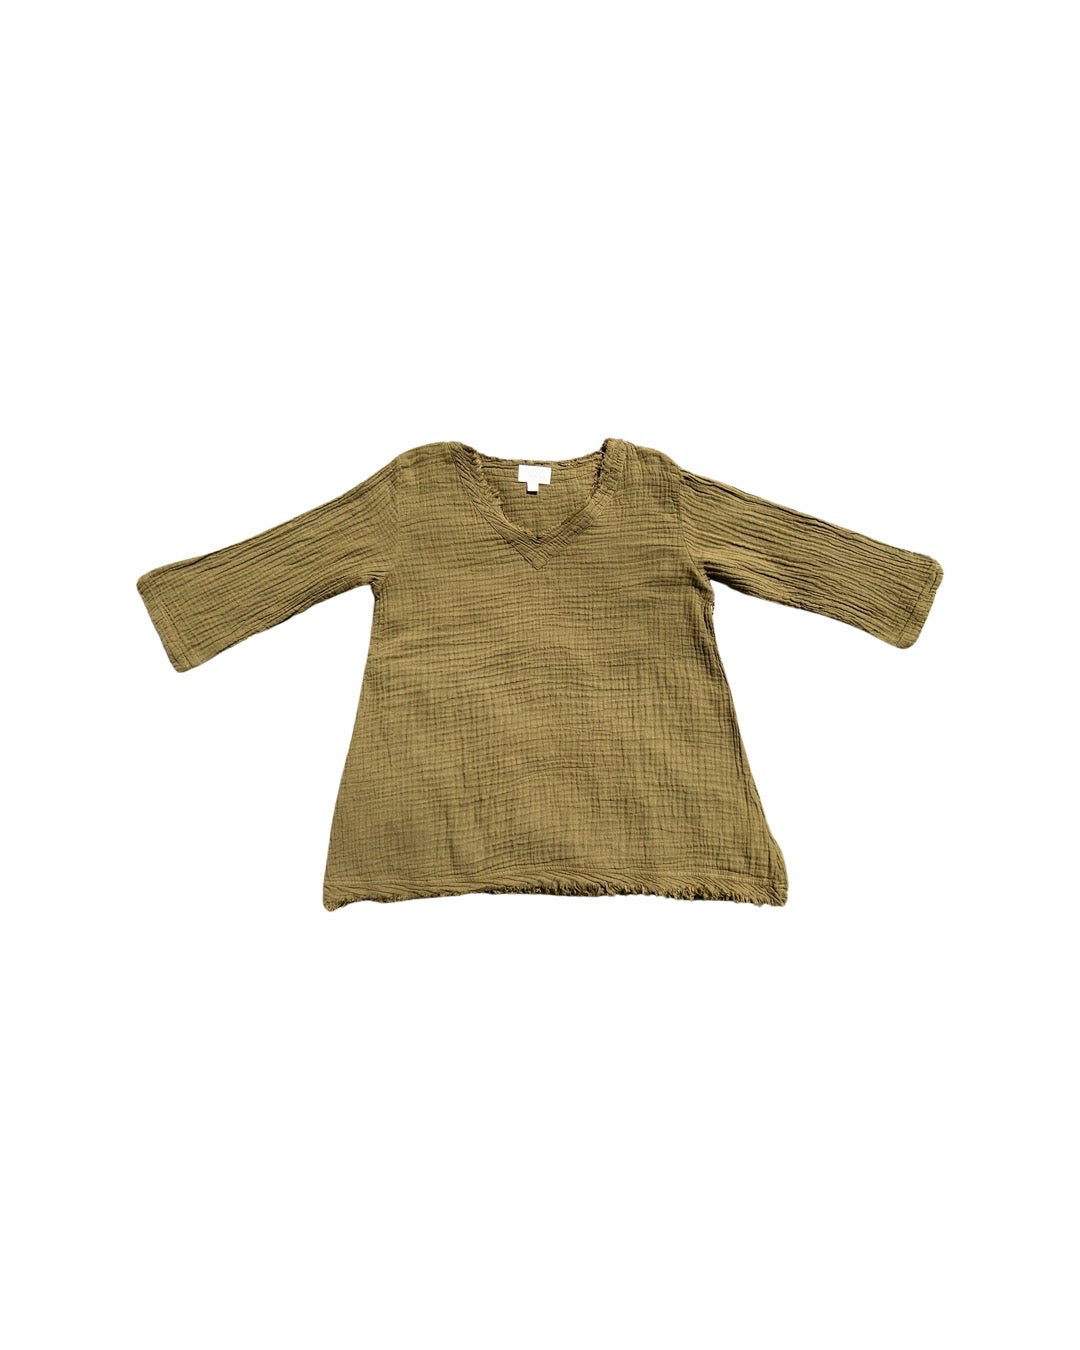 OLIVE FRAYED TUNIC - Kingfisher Road - Online Boutique